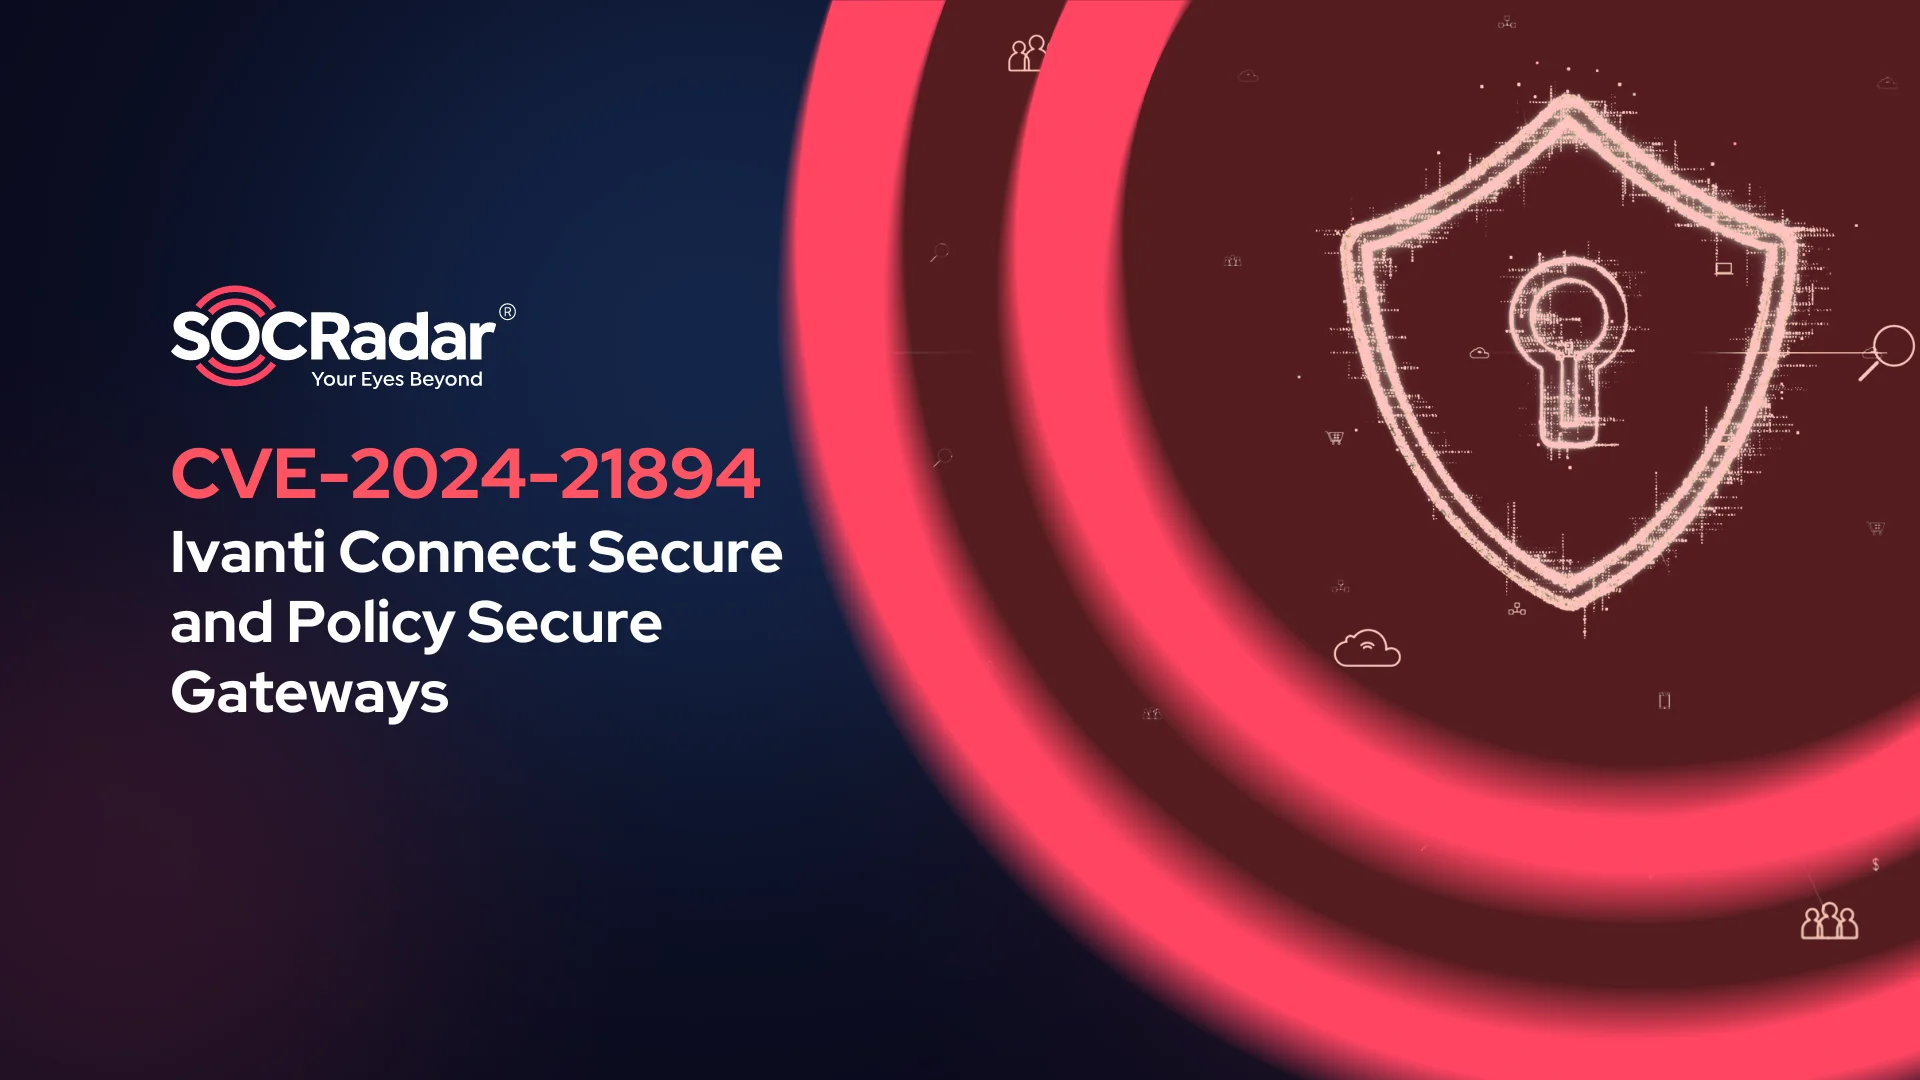 SOCRadar® Cyber Intelligence Inc. | Ivanti Connect Secure and Policy Secure Gateways Vulnerable to DoS and Code Execution (CVE-2024-21894)